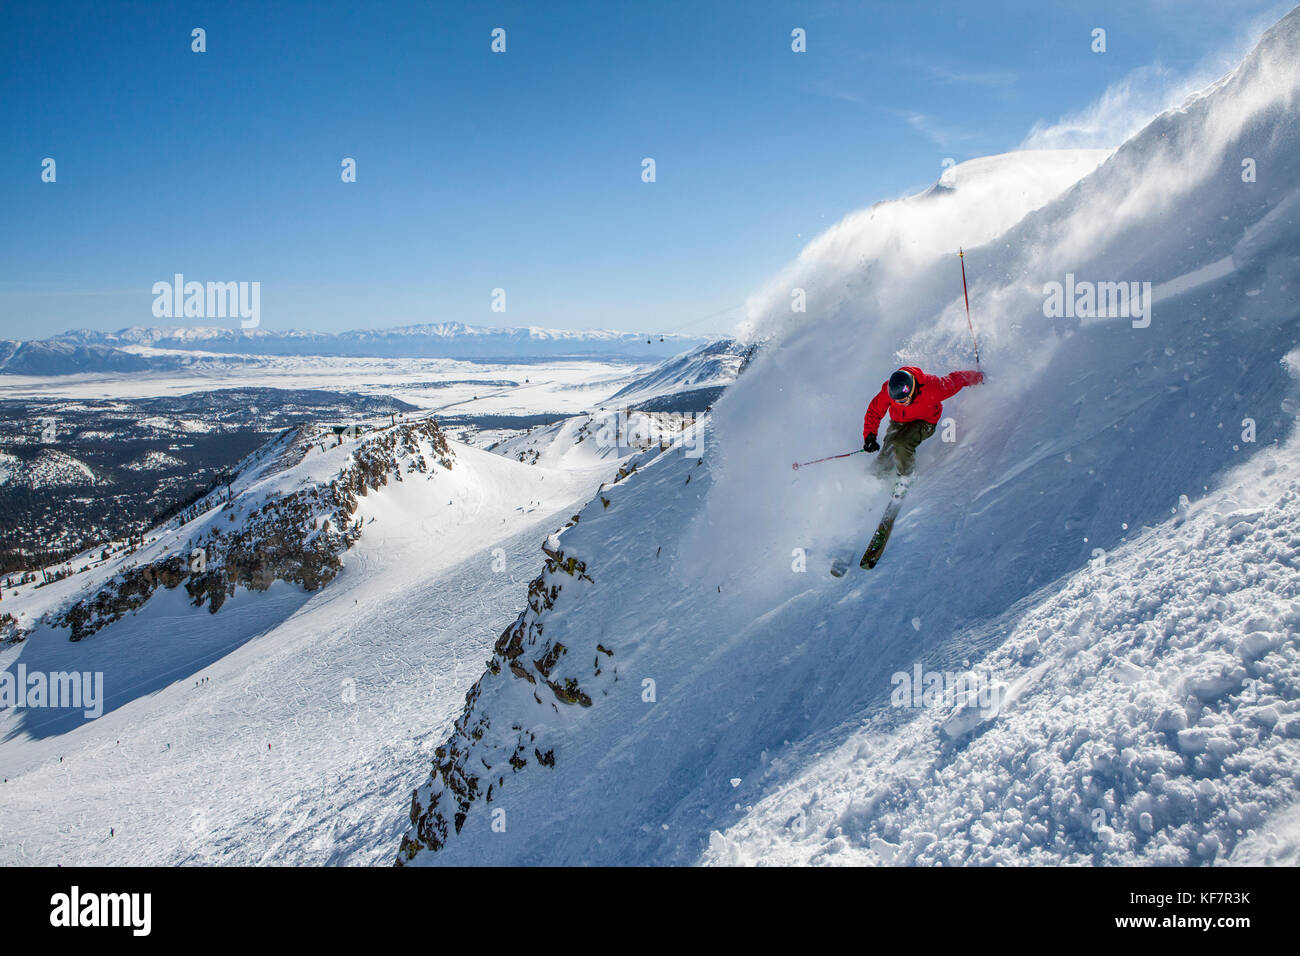 USA, California, Mammoth, a brightly colored skier carves his way down the run at Mammoth Ski Resort Stock Photo